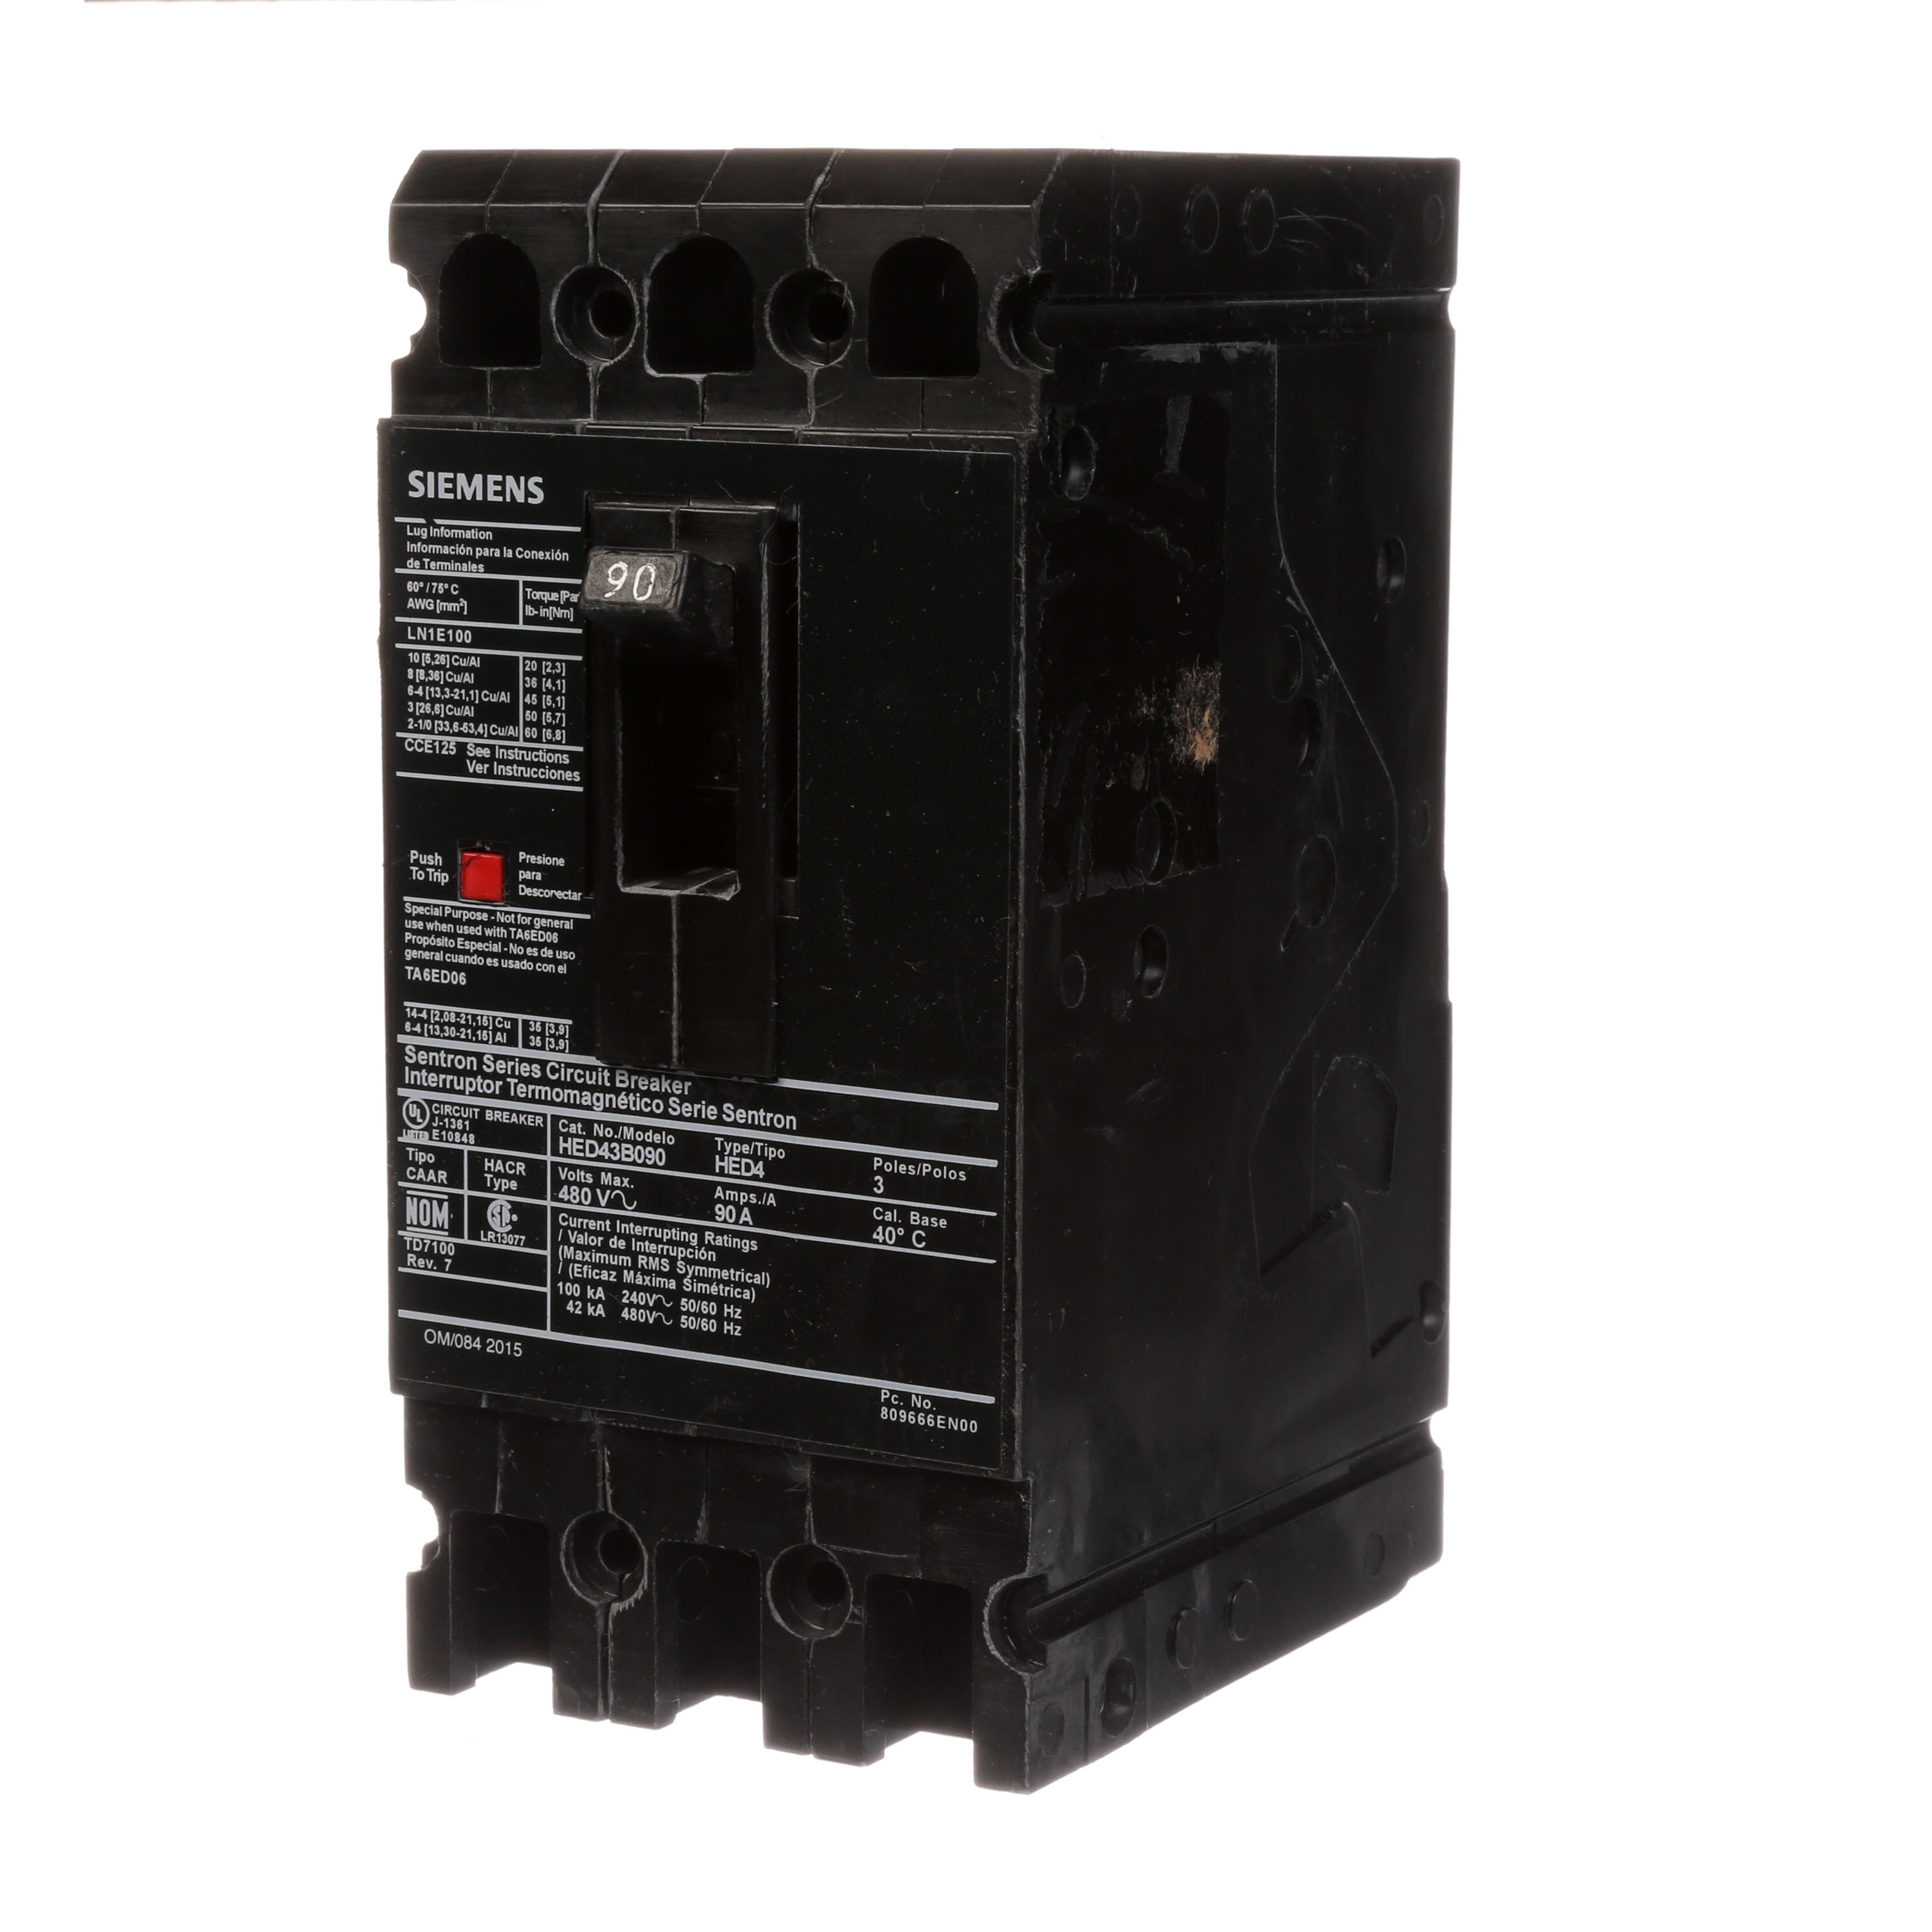 SIEMENS LOW VOLTAGE SENTRON MOLDED CASE CIRCUIT BREAKER WITH THERMAL - MAGNETICTRIP UNIT. STANDARD 40 DEG C BREAKER ED FRAME WITH HIGH BREAKING CAPACITY. 90A 3-POLE (42KAIC AT 480V). NON-INTERCHANGEABLE TRIP UNIT. SPECIAL FEATURES LOAD LUGS ONLY (LN1E100) WIRE RANGE 10 - 1/0AWG (CU/AL). DIMENSIONS (W x H x D) IN 3.00x 6.4 x 3.92.